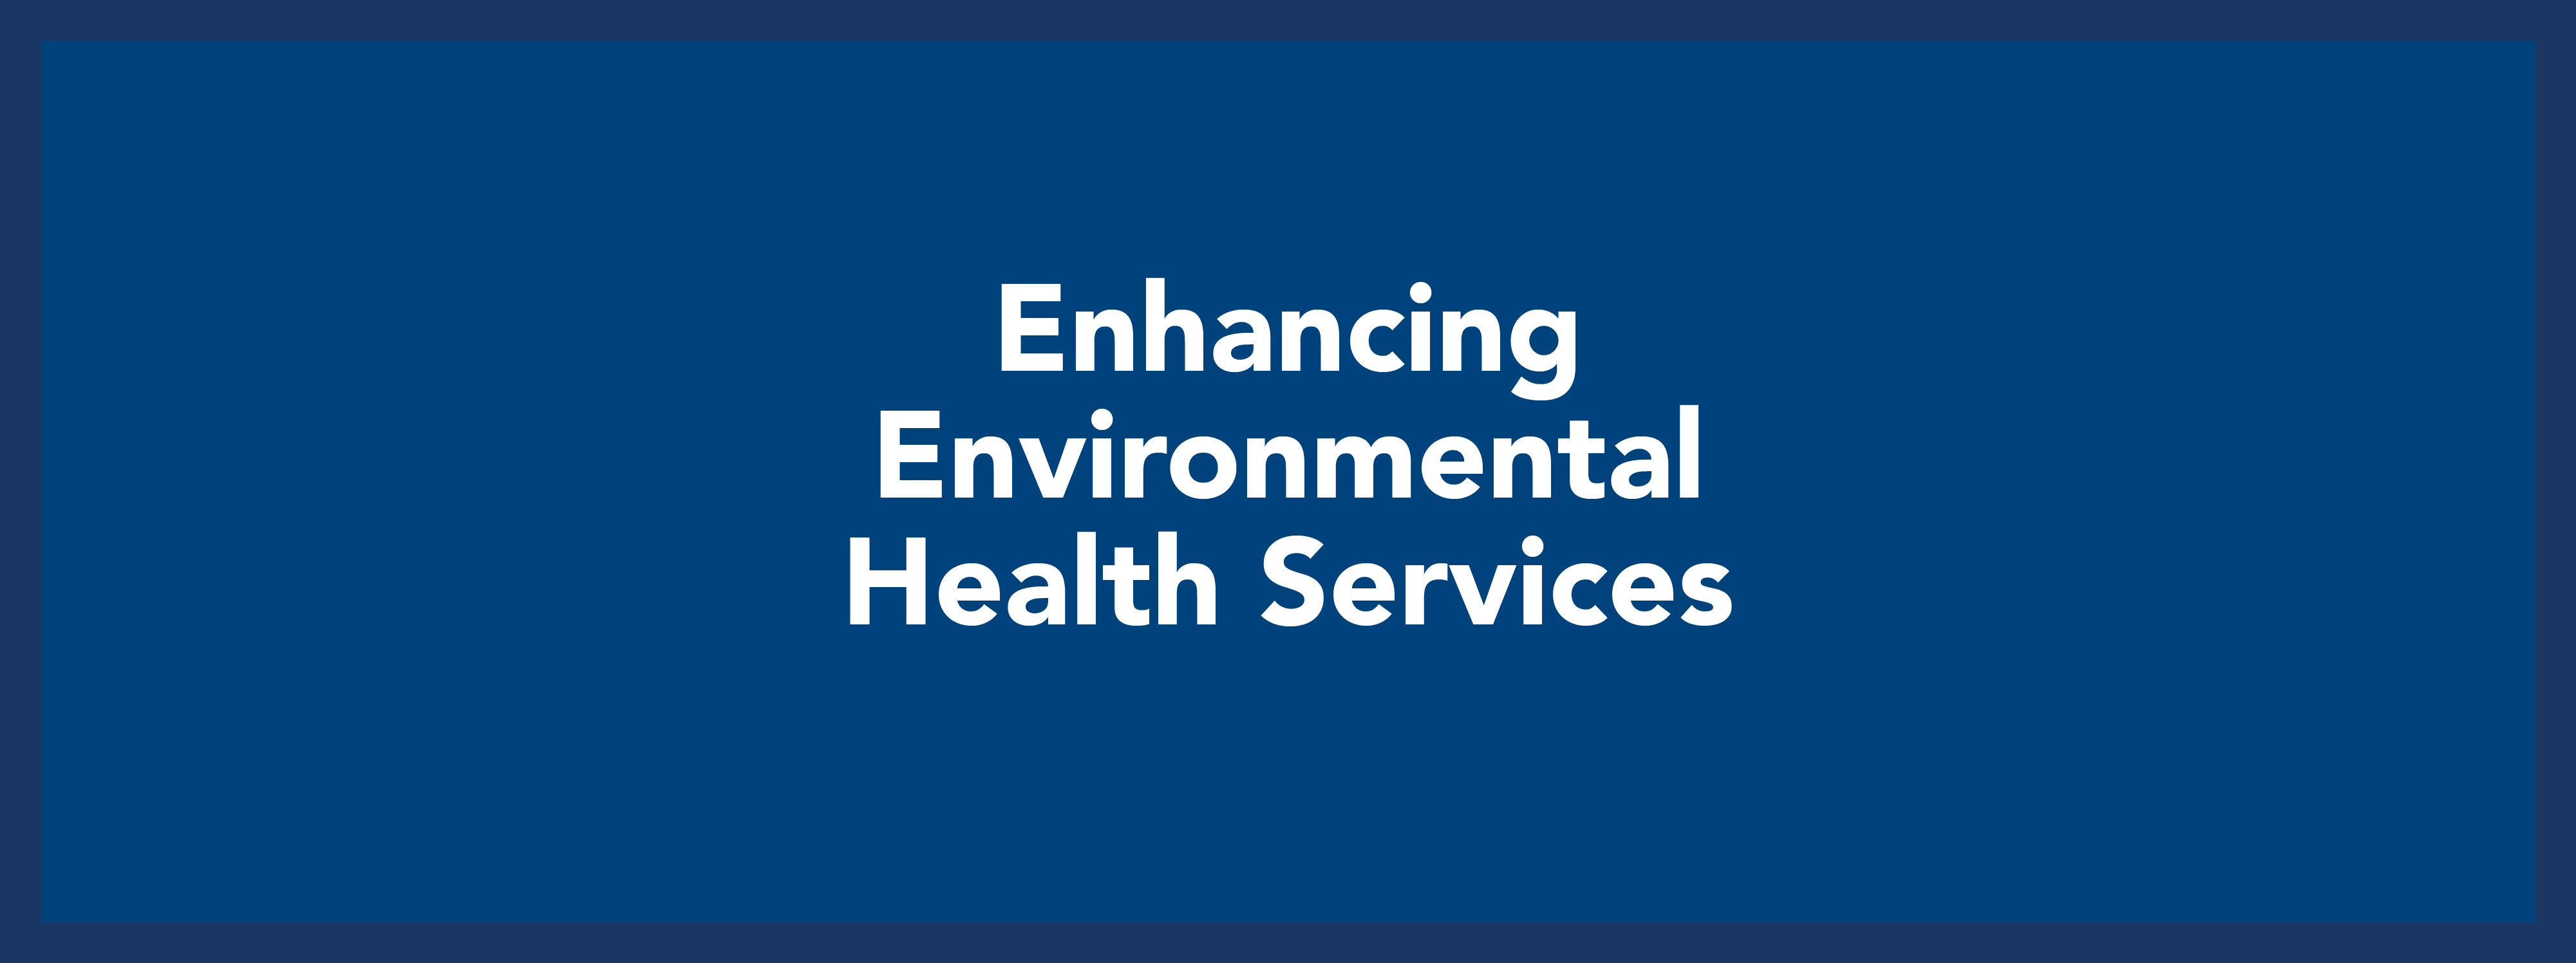 graphic: image describing the three phases of enhancing environmental health services 